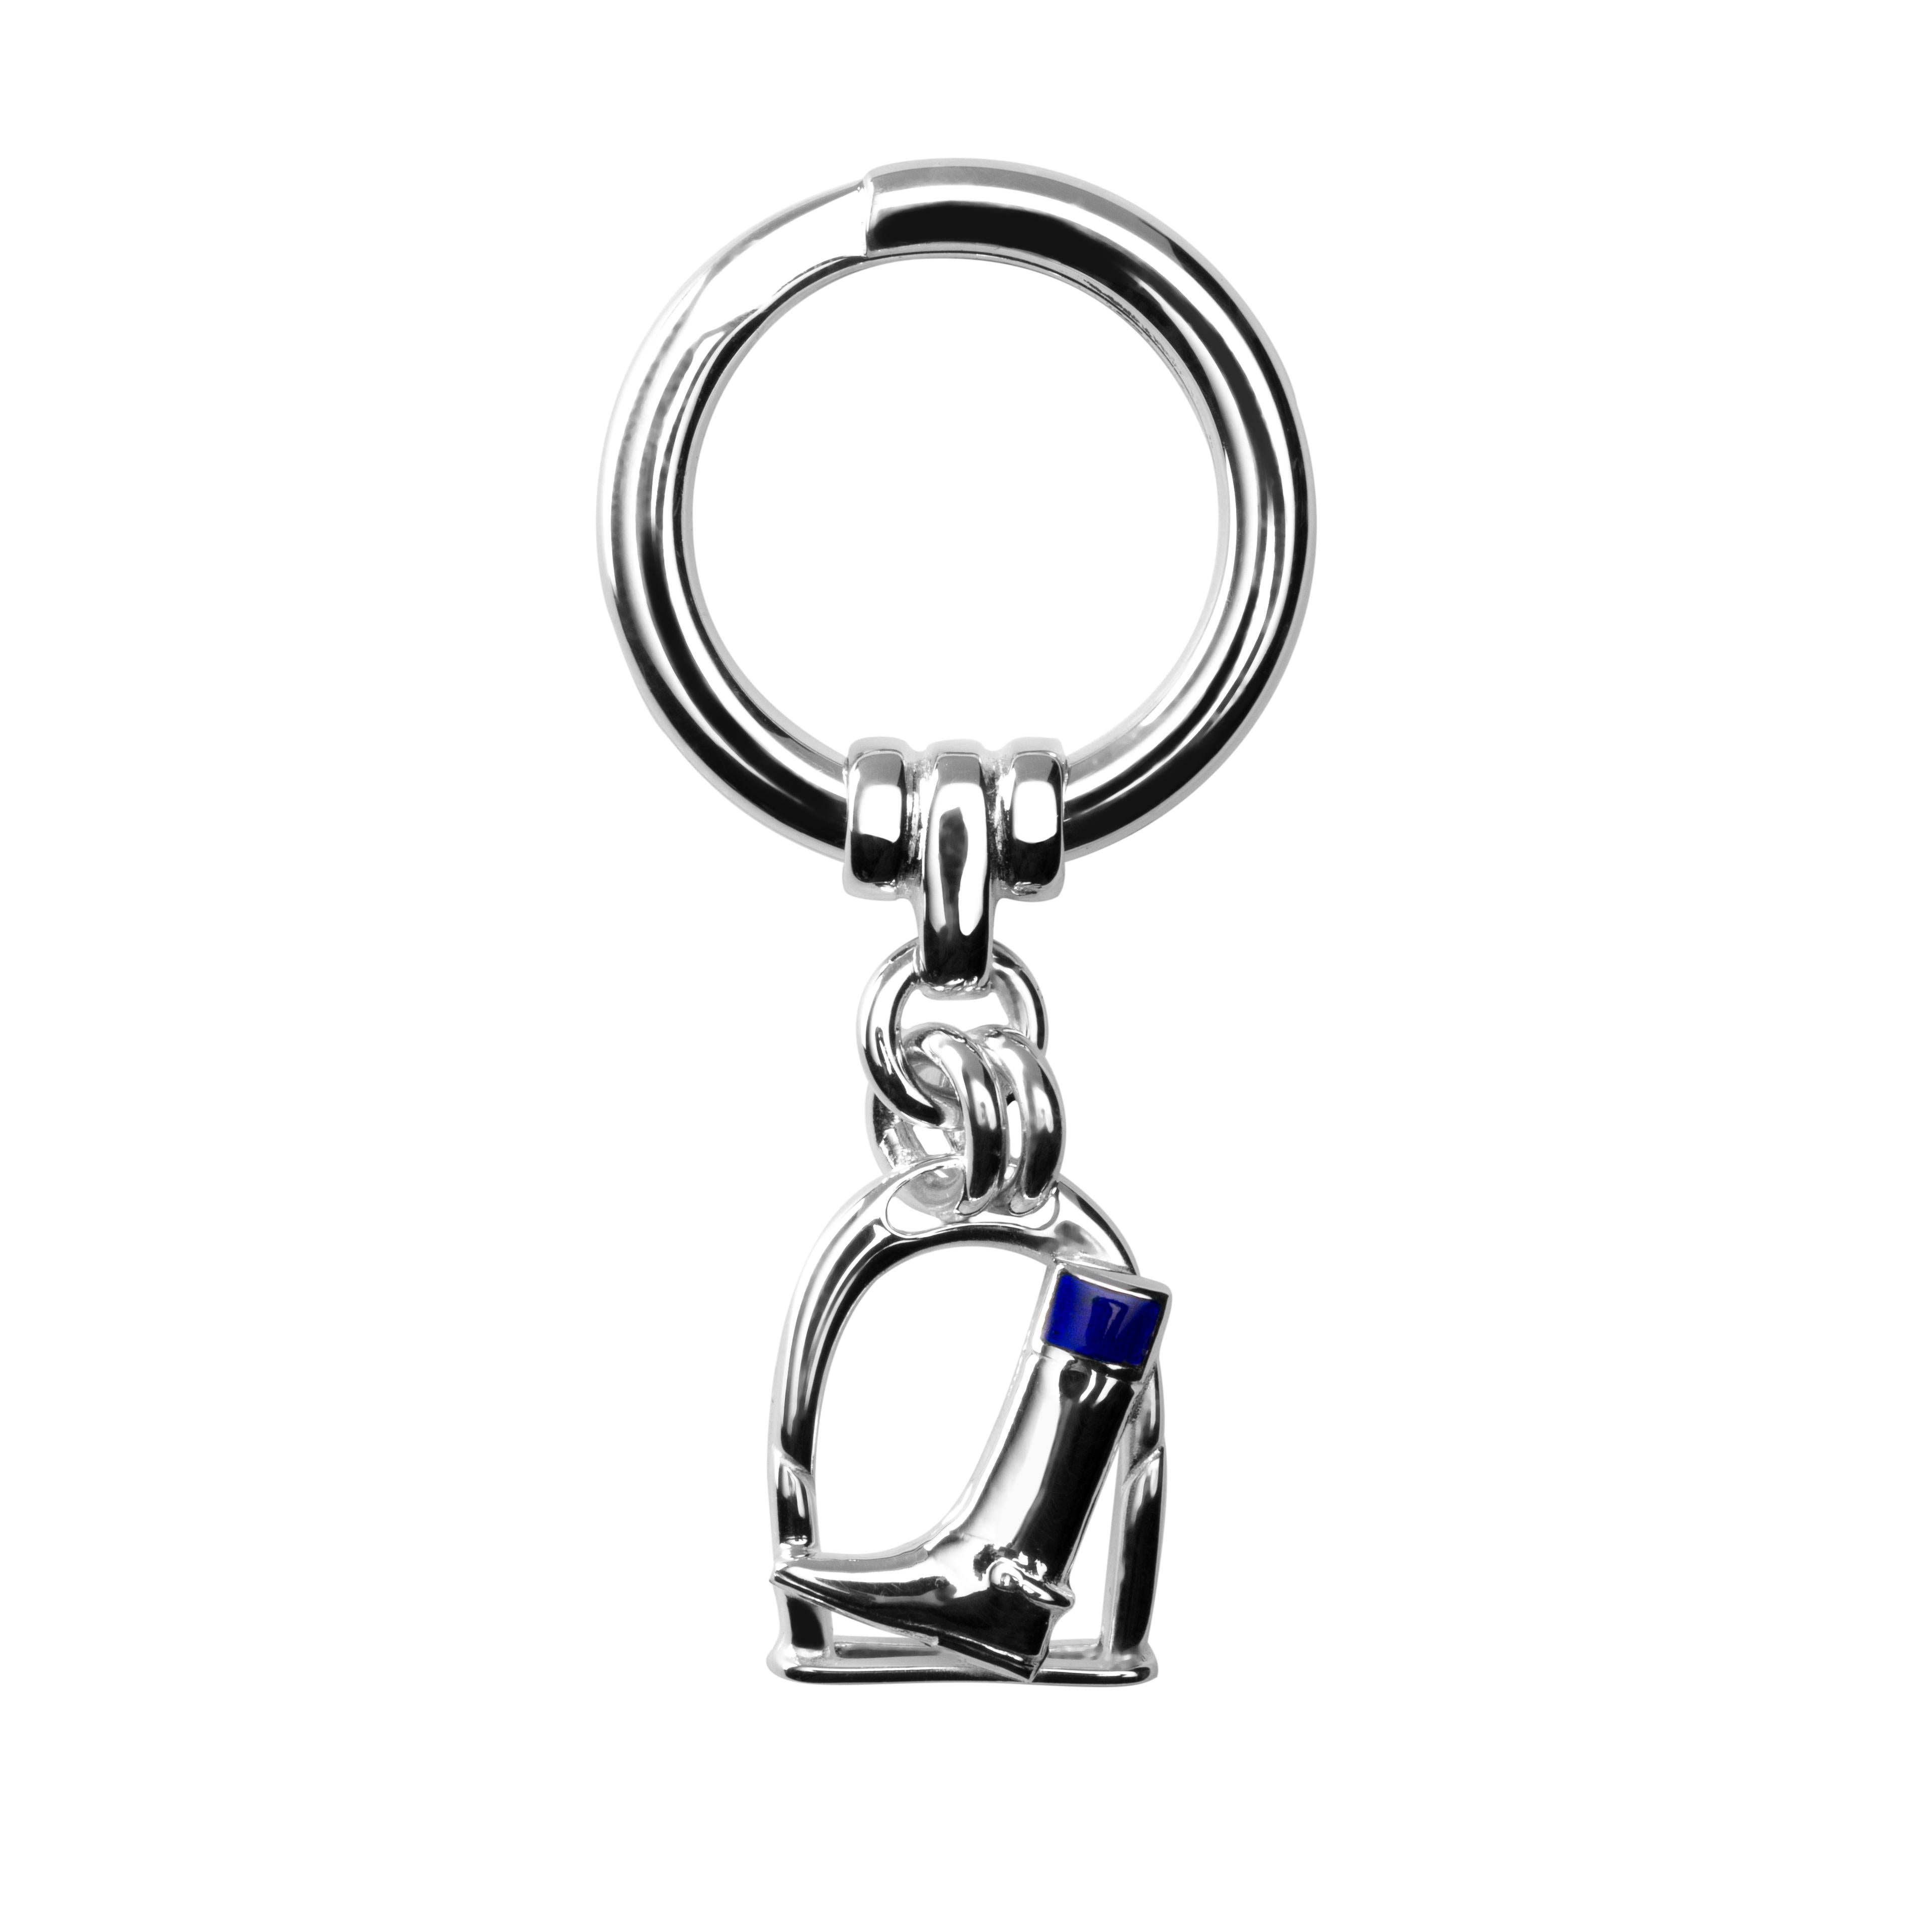 Jona design collection, hand crafted in Italy, rhodium plated sterling silver horseshoe equestrian key holder.
Dimensions : L 2.5 in/ 64.01 mm x W 0.54 in/ 13.85 mm x Depth: 0.06 in/ 1.68 mm.
All Jona jewelry is new and has never been previously